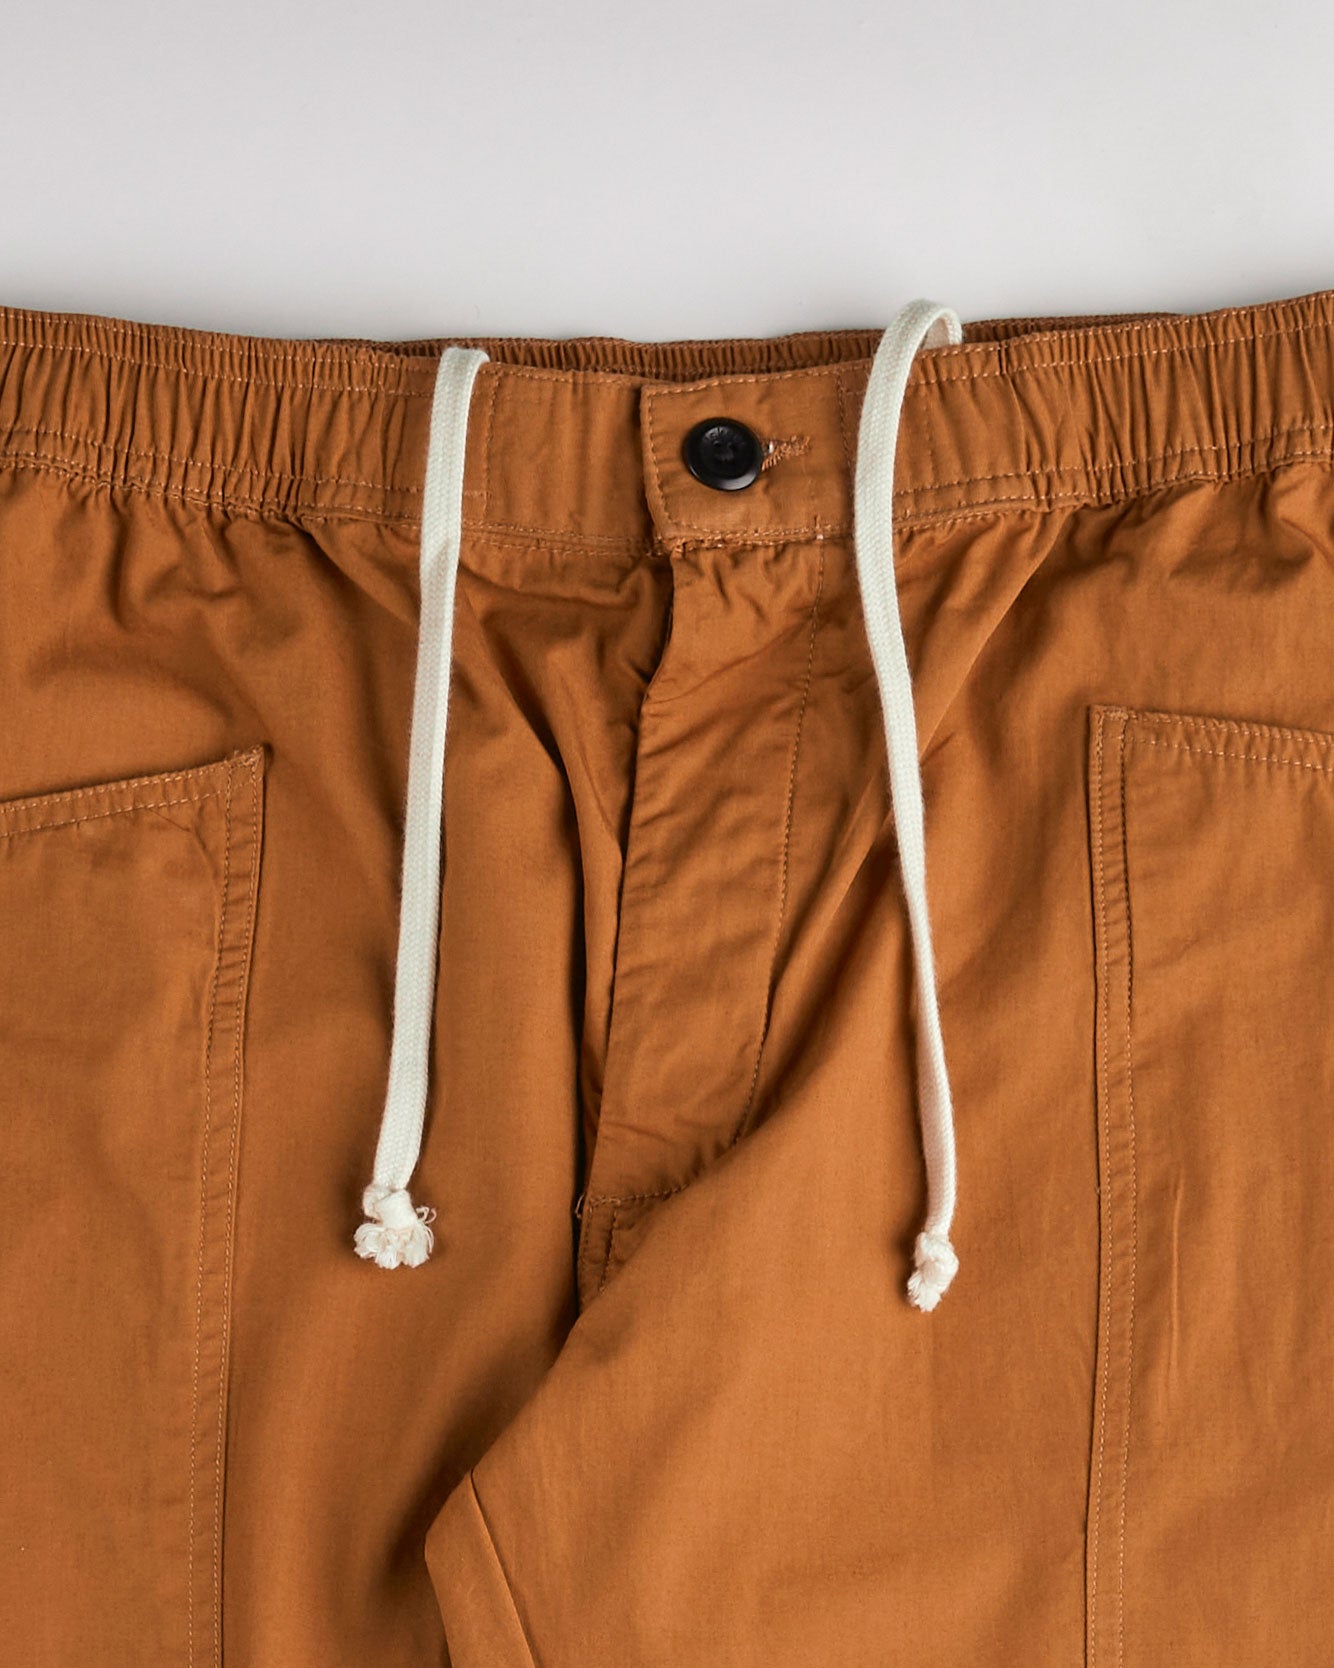 Close-up of the lightweight elasticated waist, drawstring and corozo button fastening of the Uskees #5011 lighter cotton pants.